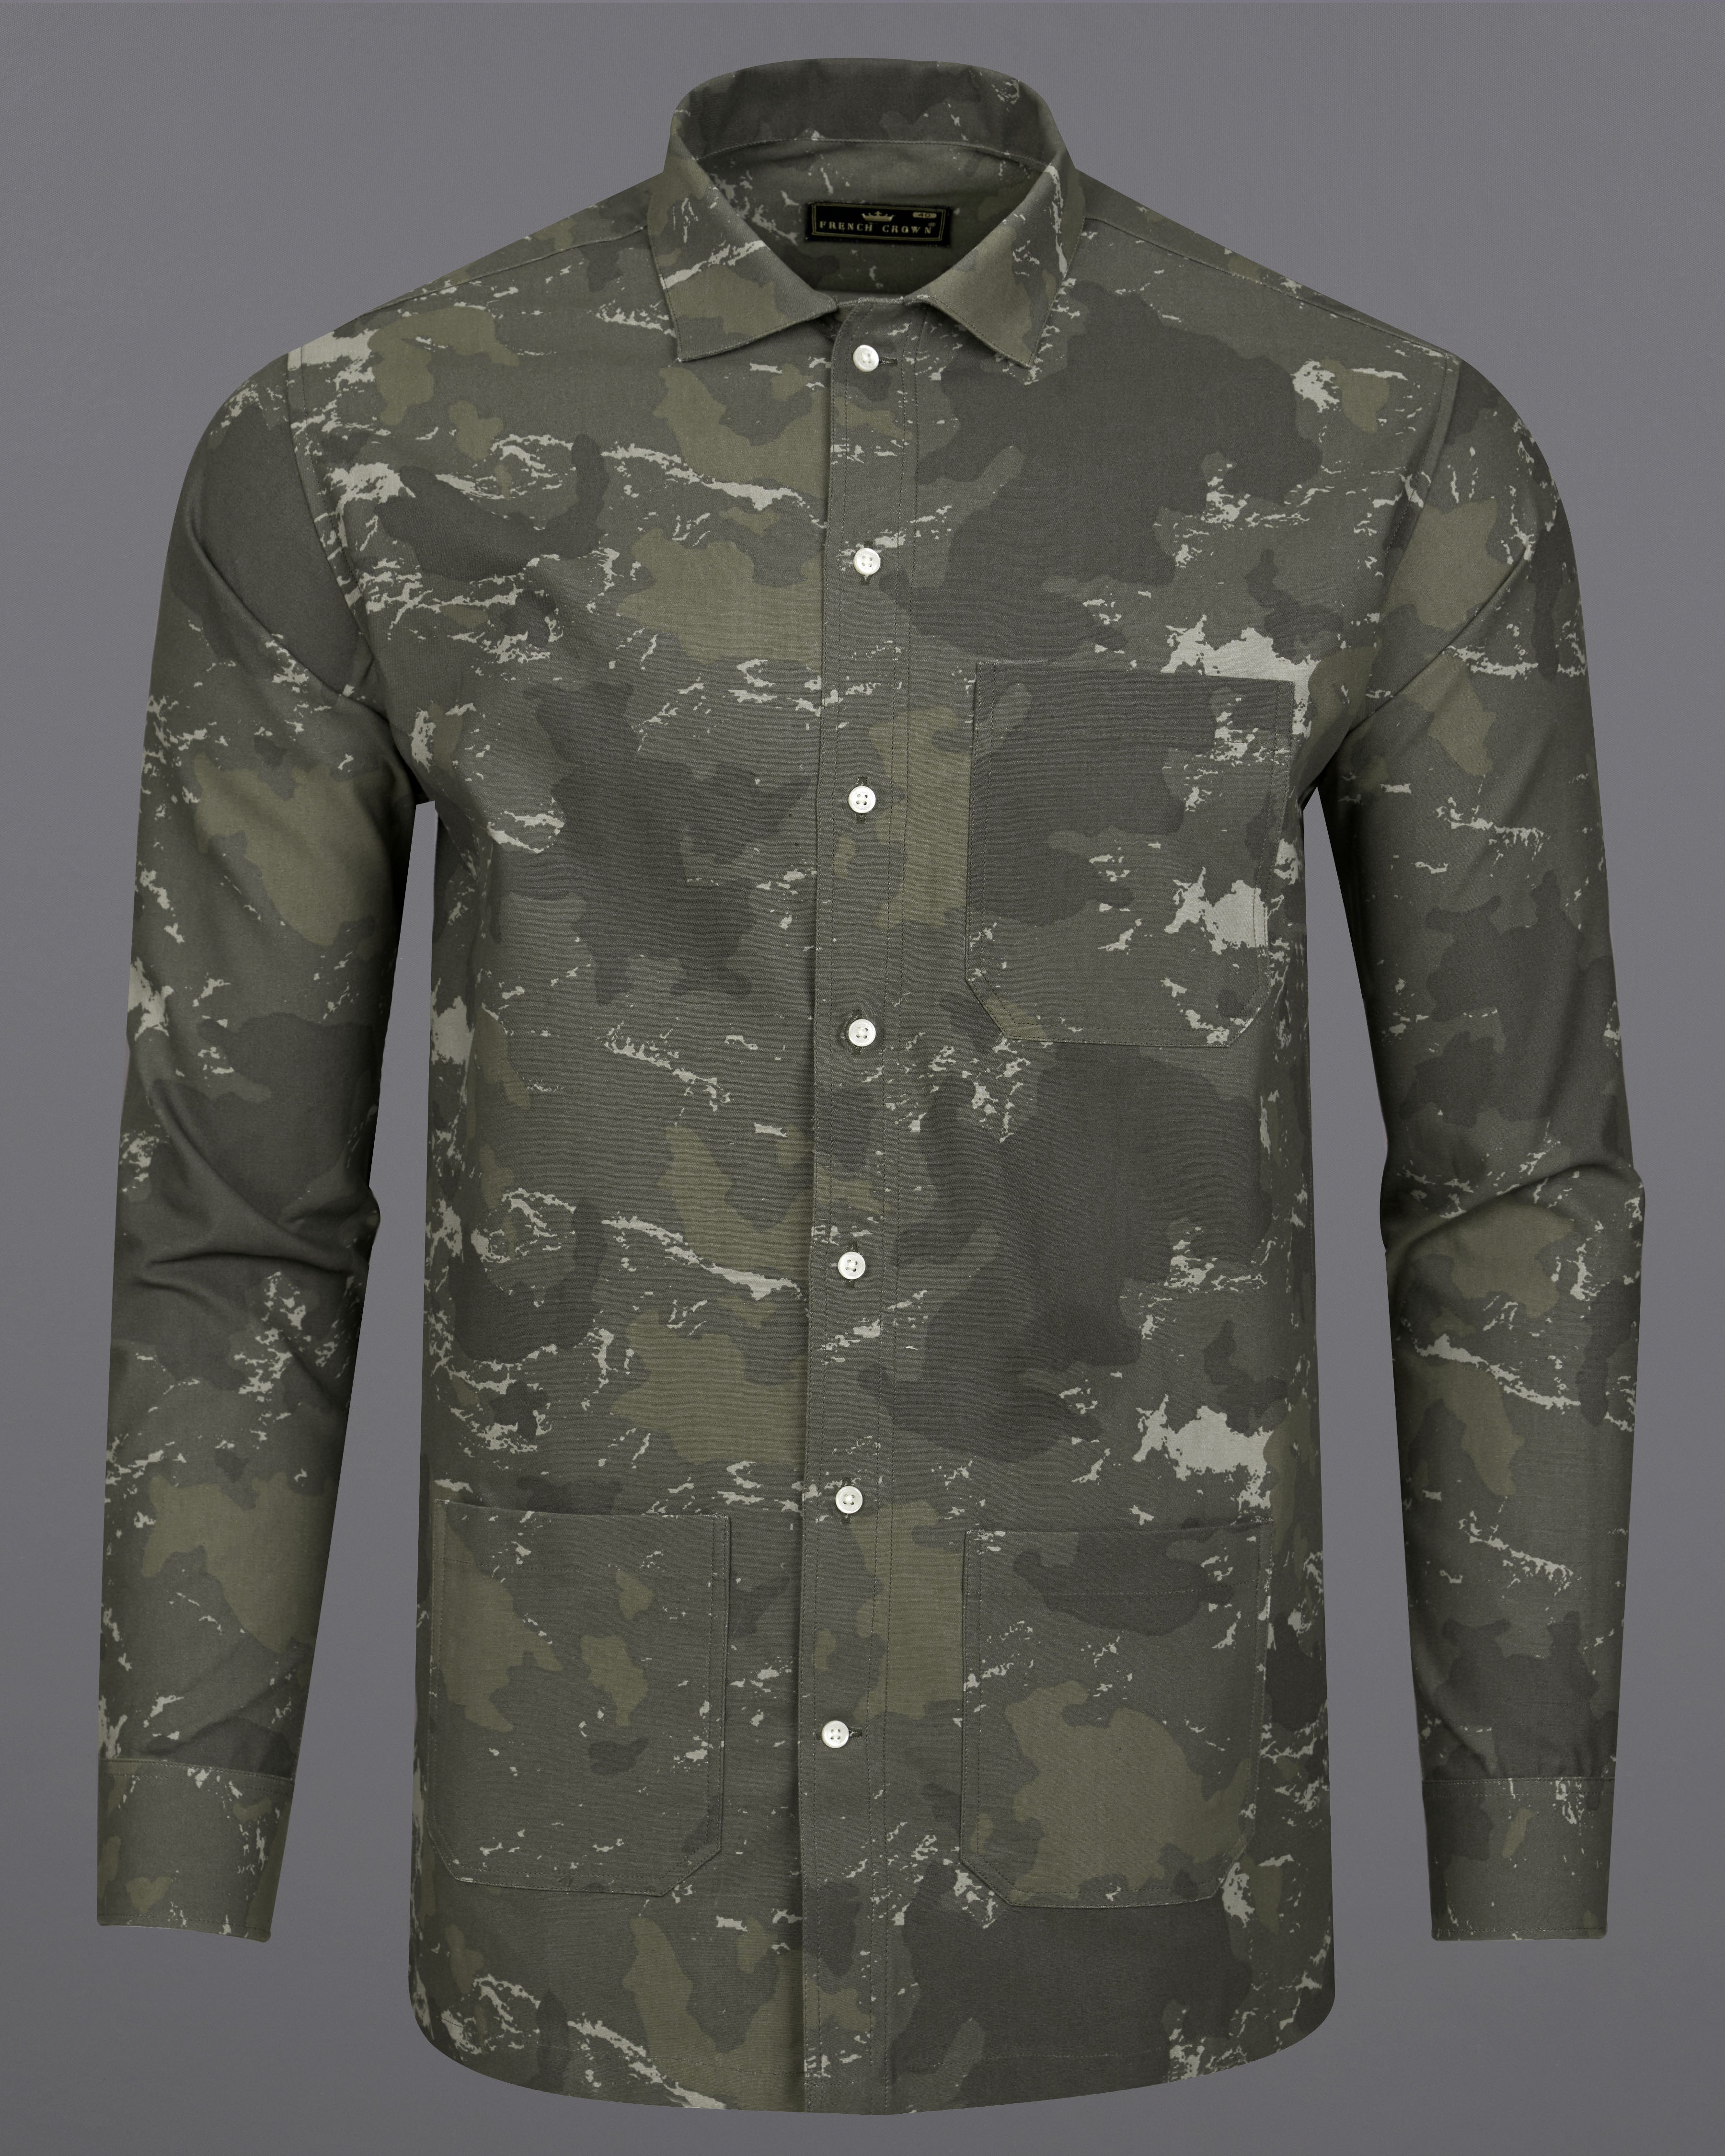 Lunar with Flintt Green and Nebula White Camouflage Royal Oxford Overshirt 9234-CA-OS-P278-38,9234-CA-OS-P278-H-38,9234-CA-OS-P278-39,9234-CA-OS-P278-H-39,9234-CA-OS-P278-40,9234-CA-OS-P278-H-40,9234-CA-OS-P278-42,9234-CA-OS-P278-H-42,9234-CA-OS-P278-44,9234-CA-OS-P278-H-44,9234-CA-OS-P278-46,9234-CA-OS-P278-H-46,9234-CA-OS-P278-48,9234-CA-OS-P278-H-48,9234-CA-OS-P278-50,9234-CA-OS-P278-H-50,9234-CA-OS-P278-52,9234-CA-OS-P278-H-52